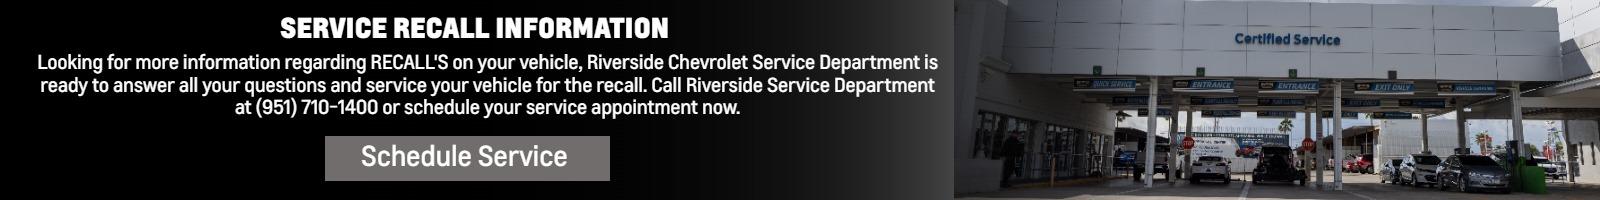 SERVICE RECALL INFORMATION AND WE SERVICE RECALLS!

Looking for more information regarding RECALL'S on your vehicle, Riverside Chevrolet Service Department is ready to answer all your questions and service your vehicle for the recall. Call Riverside Service Department at (951) 710-1400 or schedule your service appointment now.